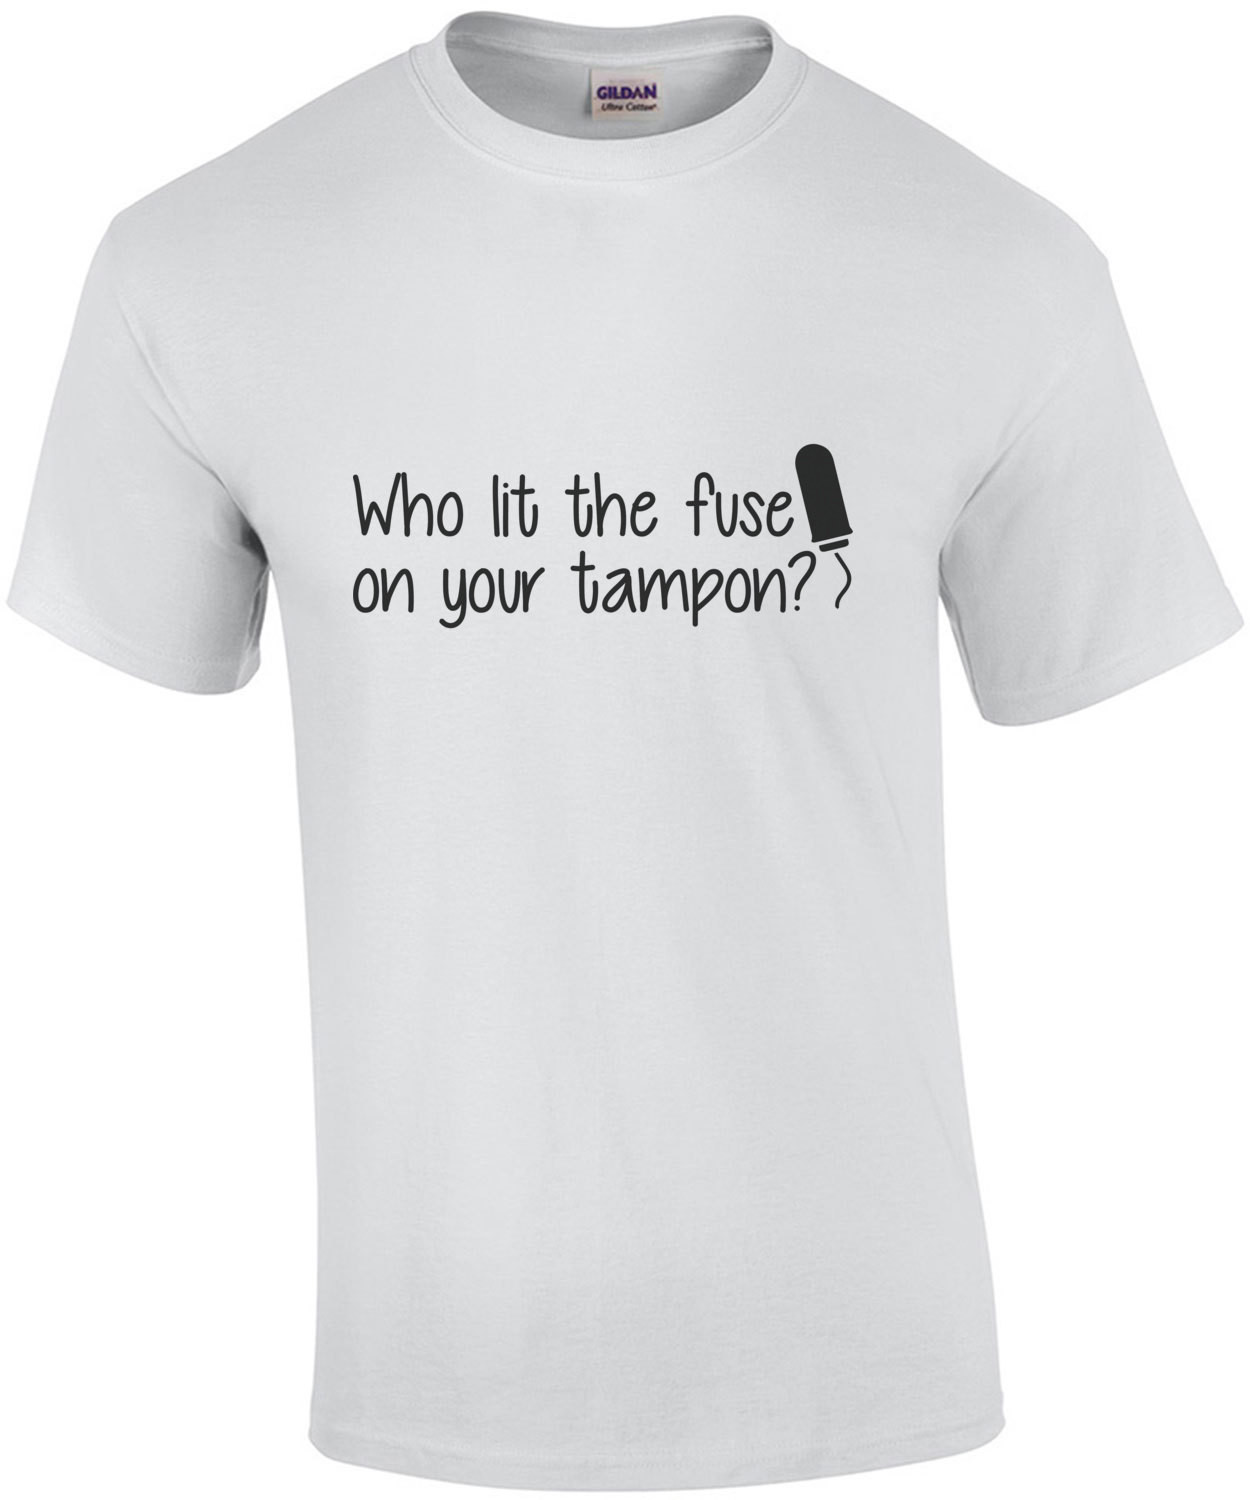 Who lit the fuse on your tampon - funny insult t-shirt